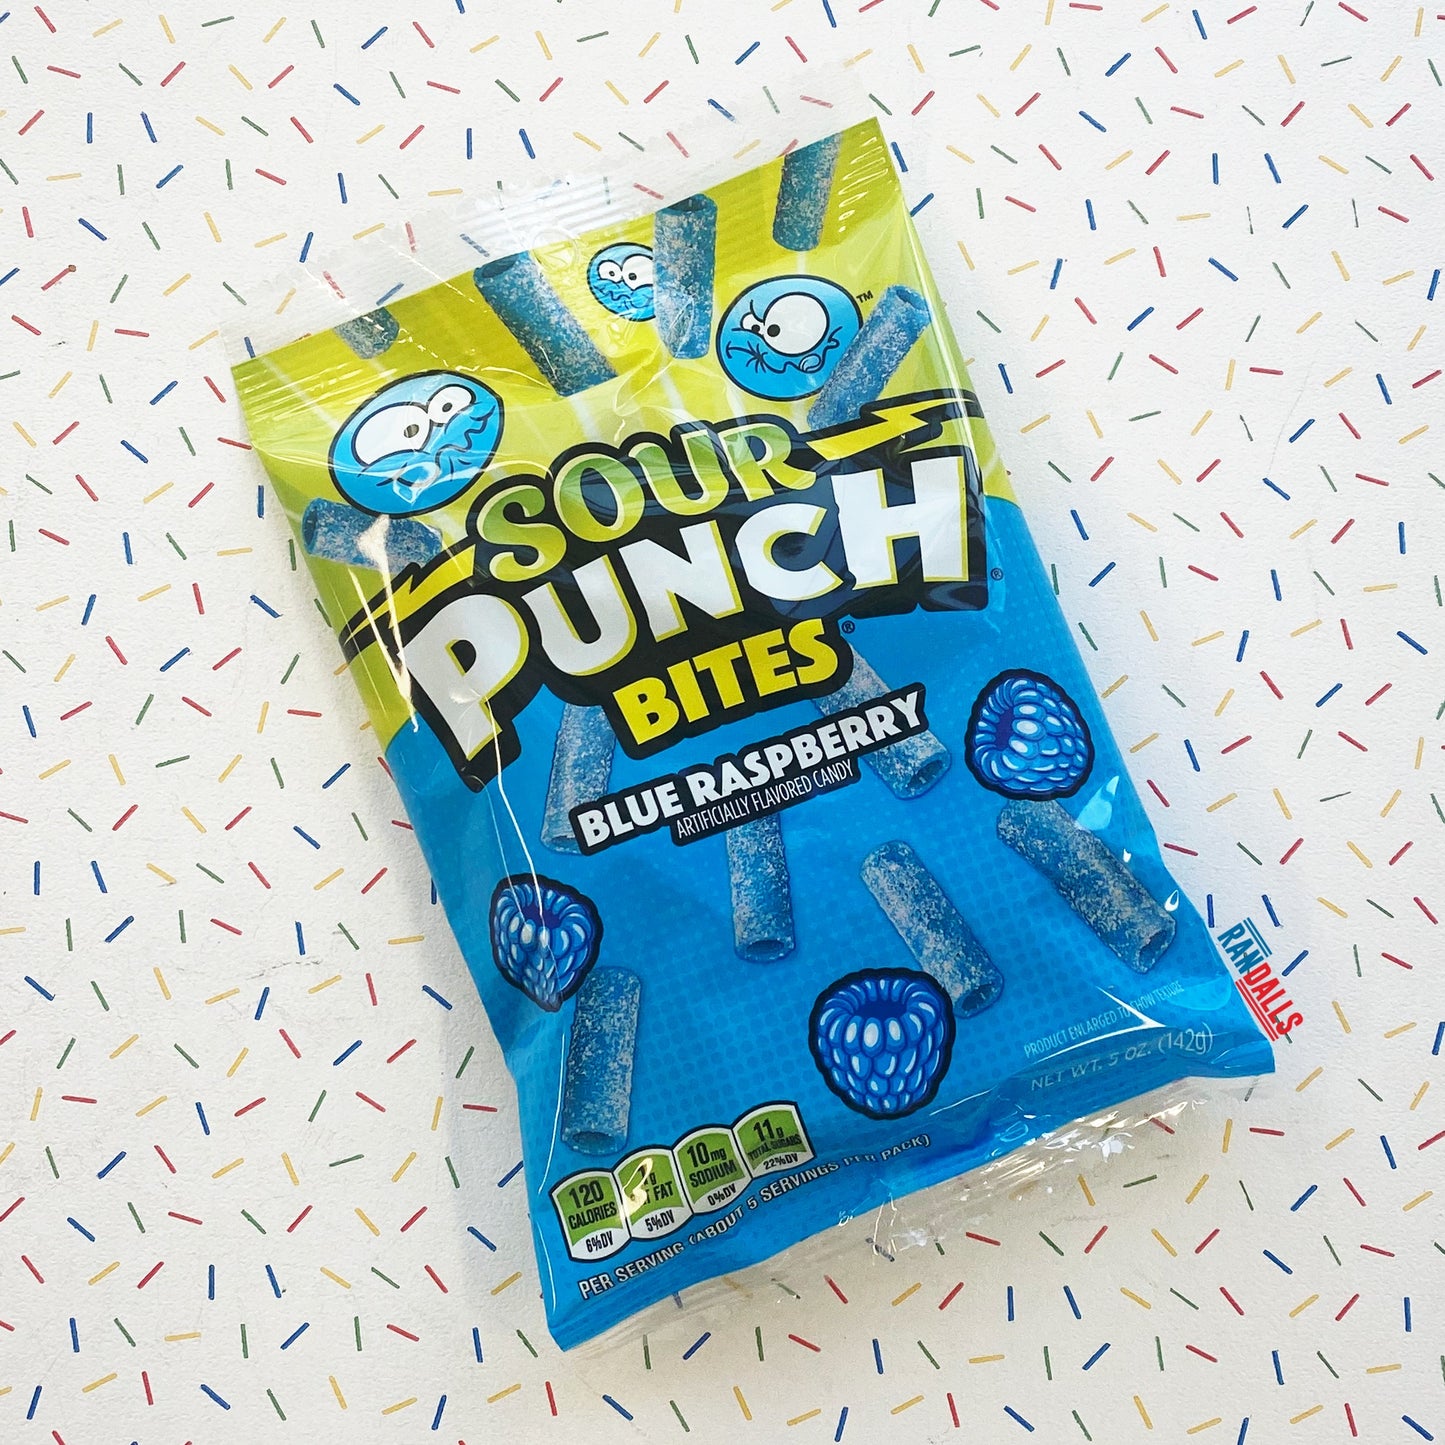 sour punch bites blue raspberry, chewy, candy, sweets, gummy, chew, usa, randalls, sugar, fizzy